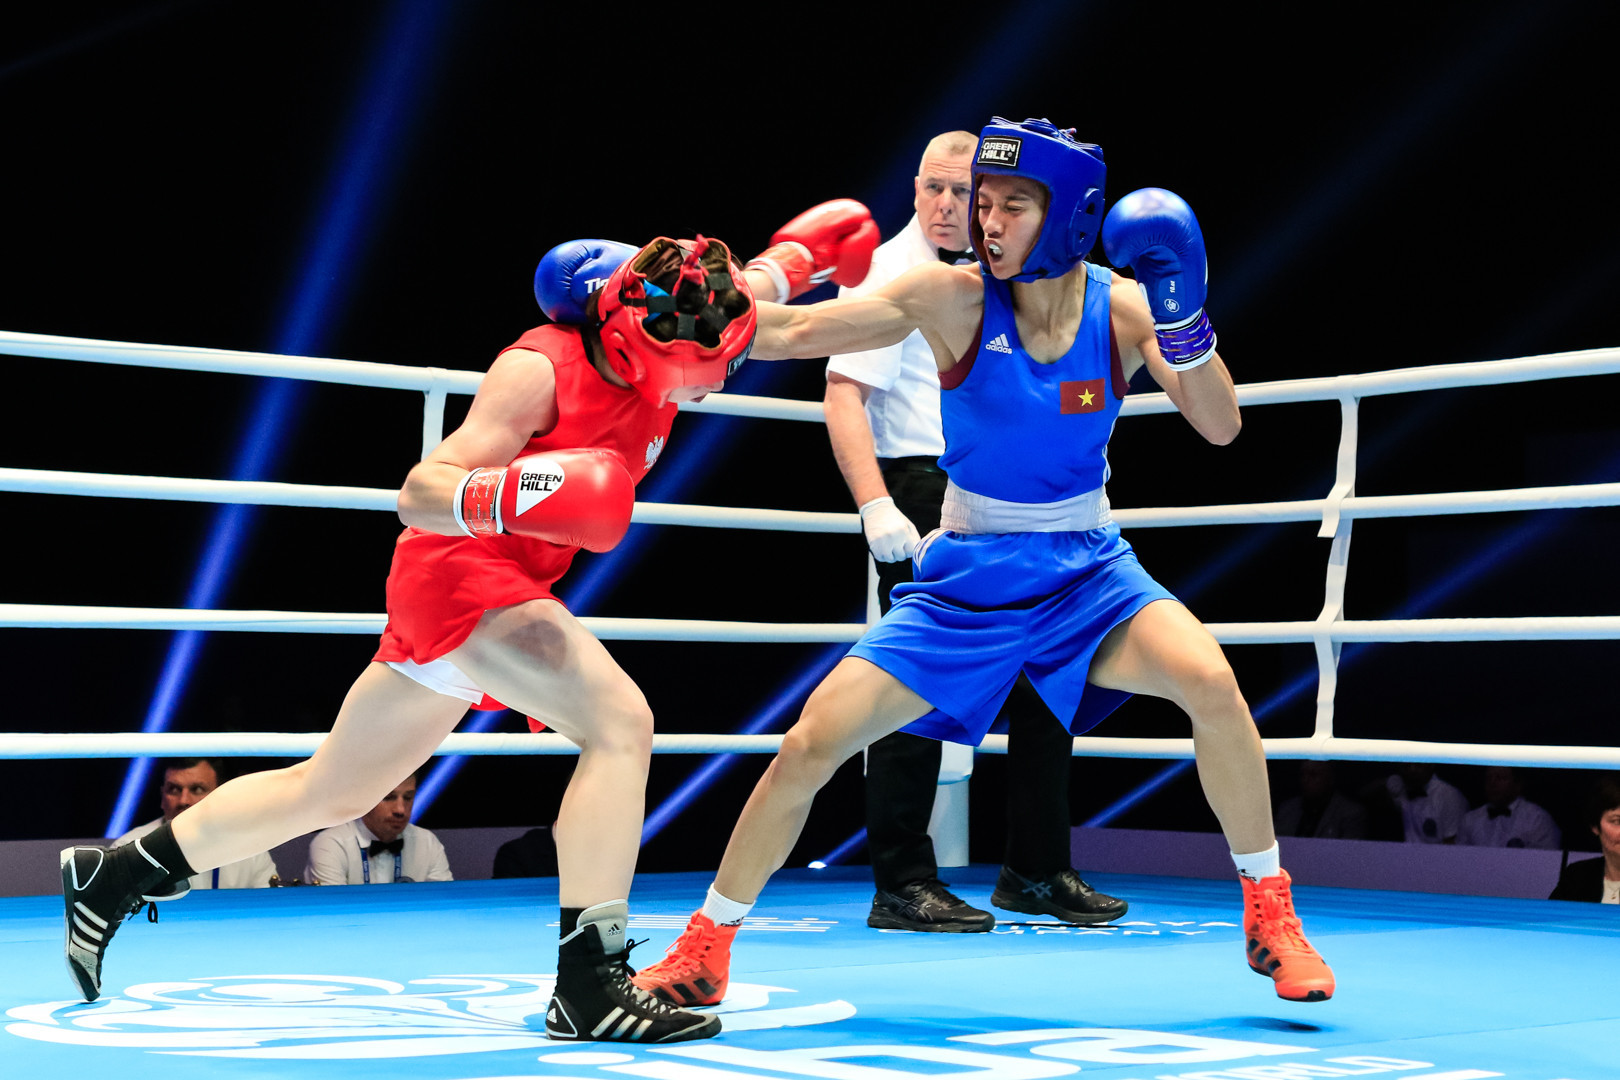 There will be five weight classes at the women's Tokyo 2020 boxing event, including featherweight ©Getty Images